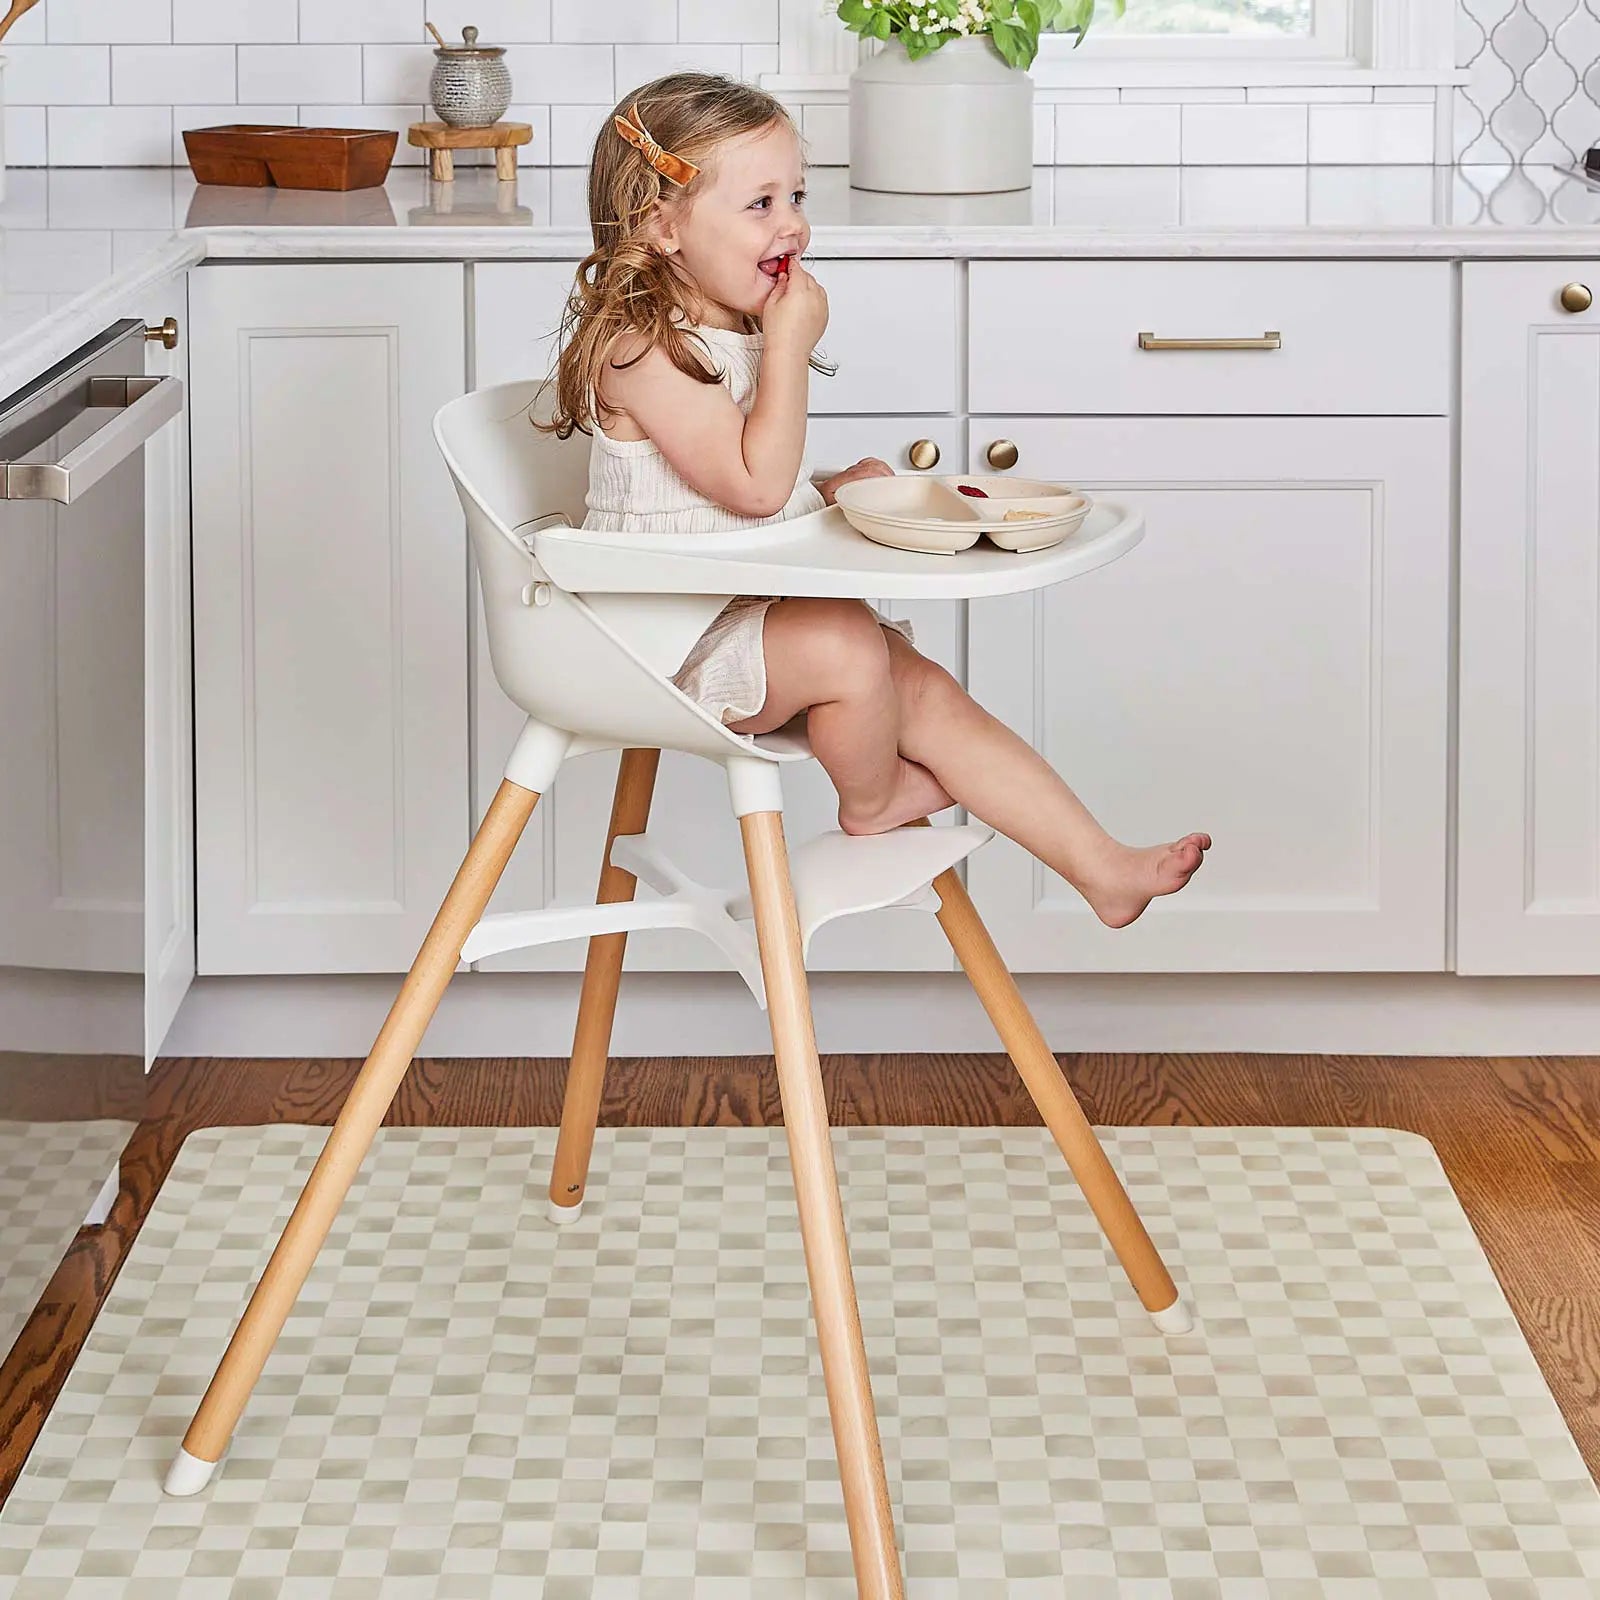 Checker almond beige geometric print high chair mat shown in a kitchen underneath a highchair with a toddler girl sitting in the chair smiling and eating fruit